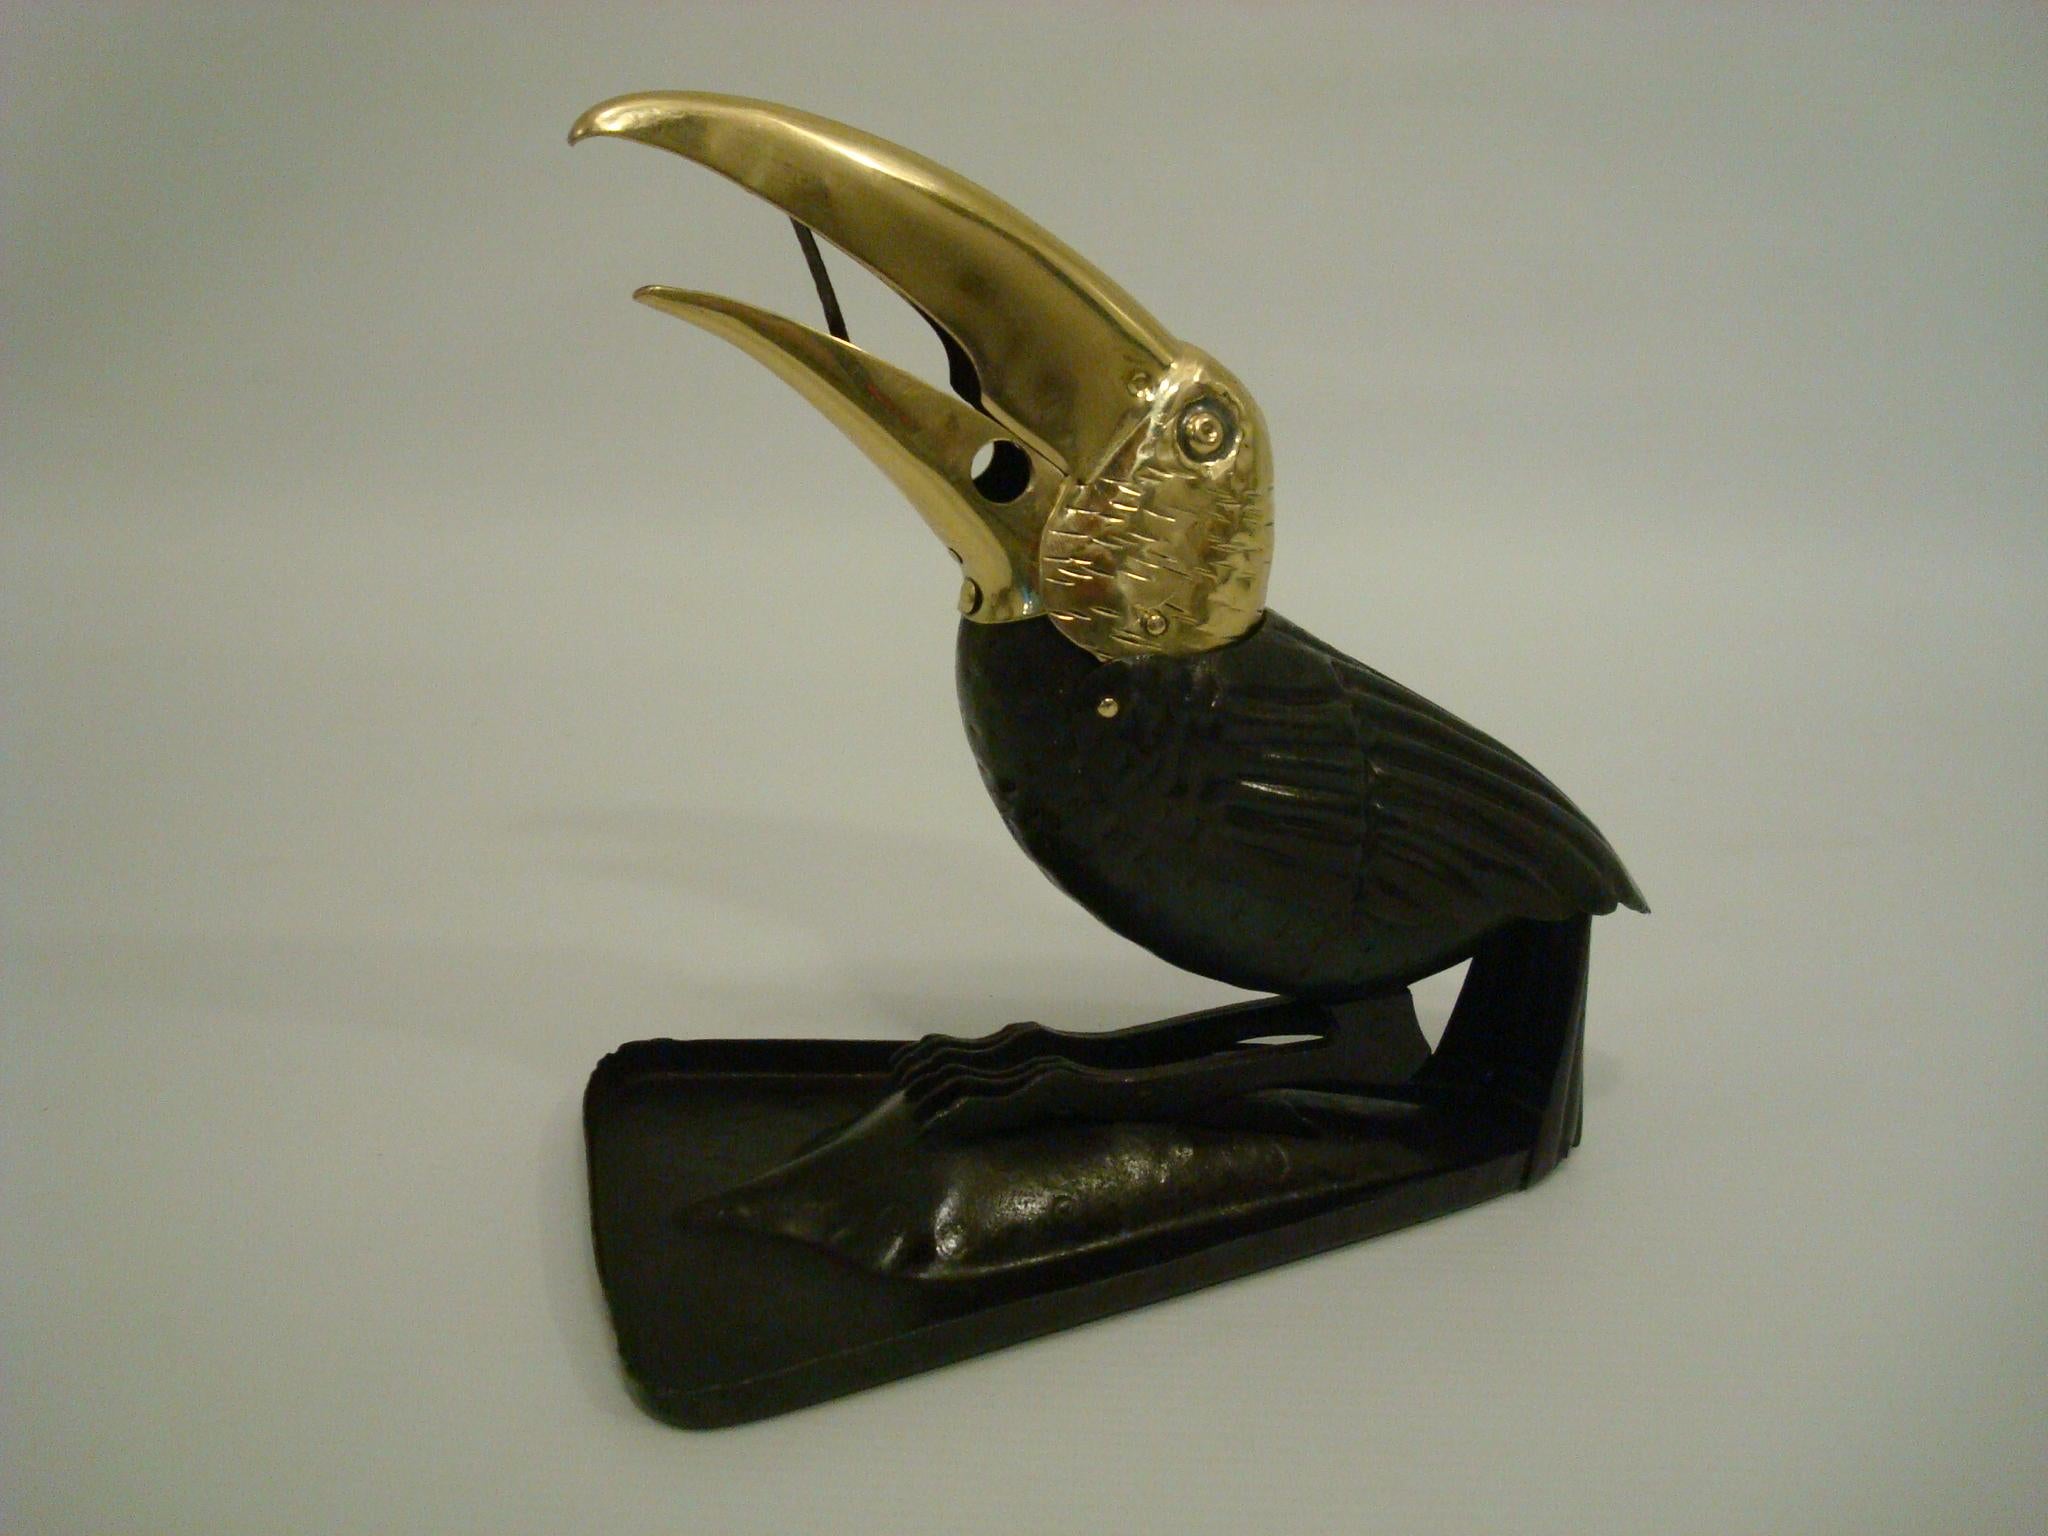 Molded Cigar Cutter in a Shape of a Toucan, circa 1900-1910